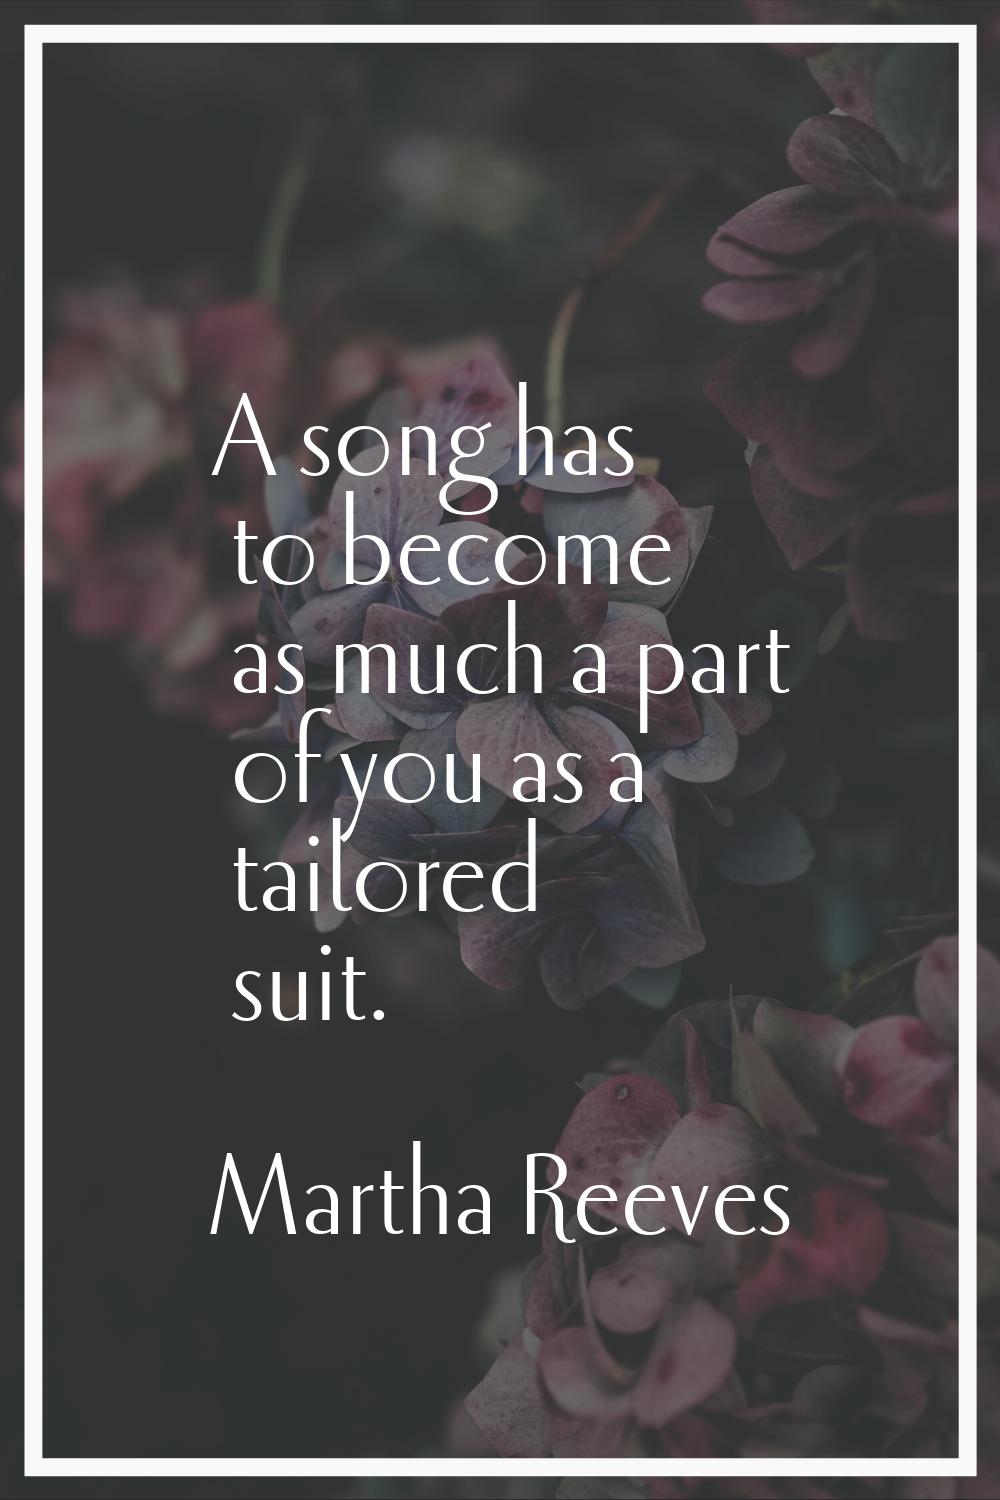 A song has to become as much a part of you as a tailored suit.